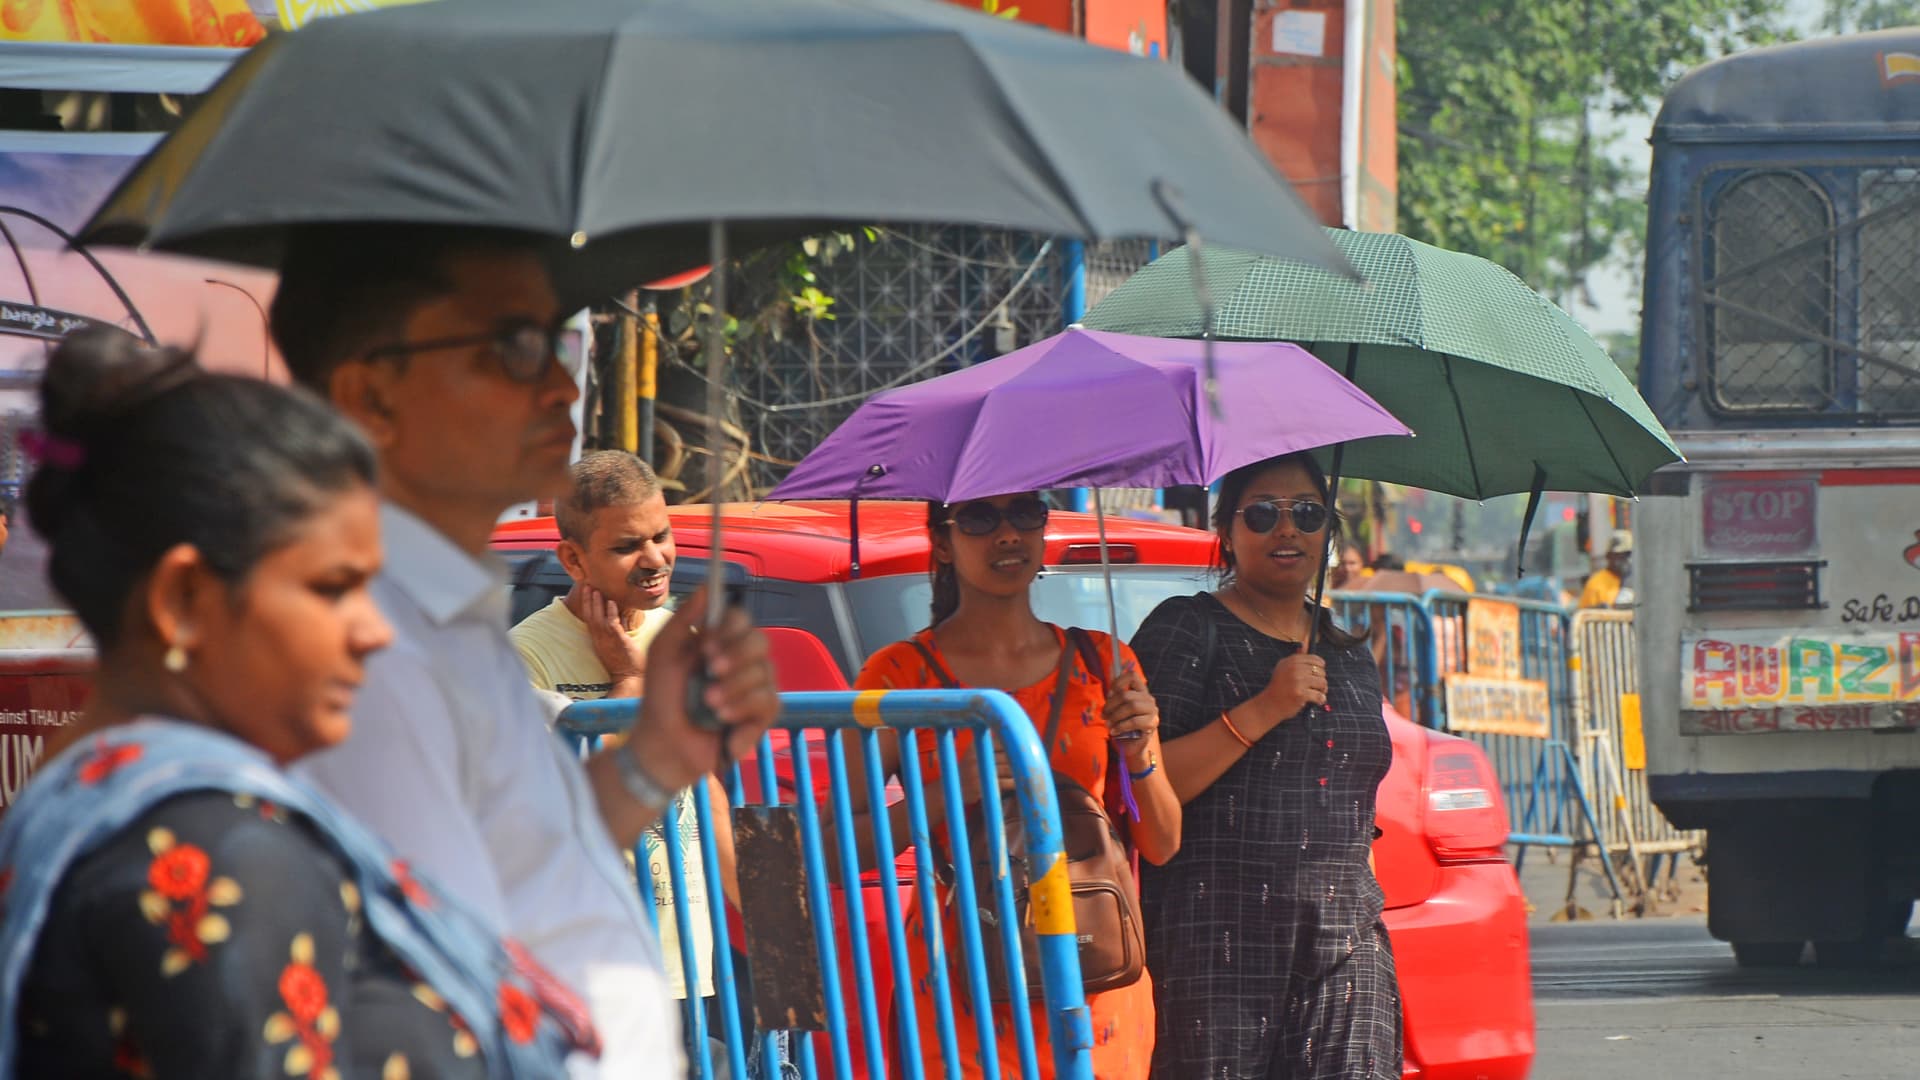 People outside holding an umbrella during hot summer day in Kolkata, West Bengal, India on April 26. The temperature in Kolkata was around 40°c.